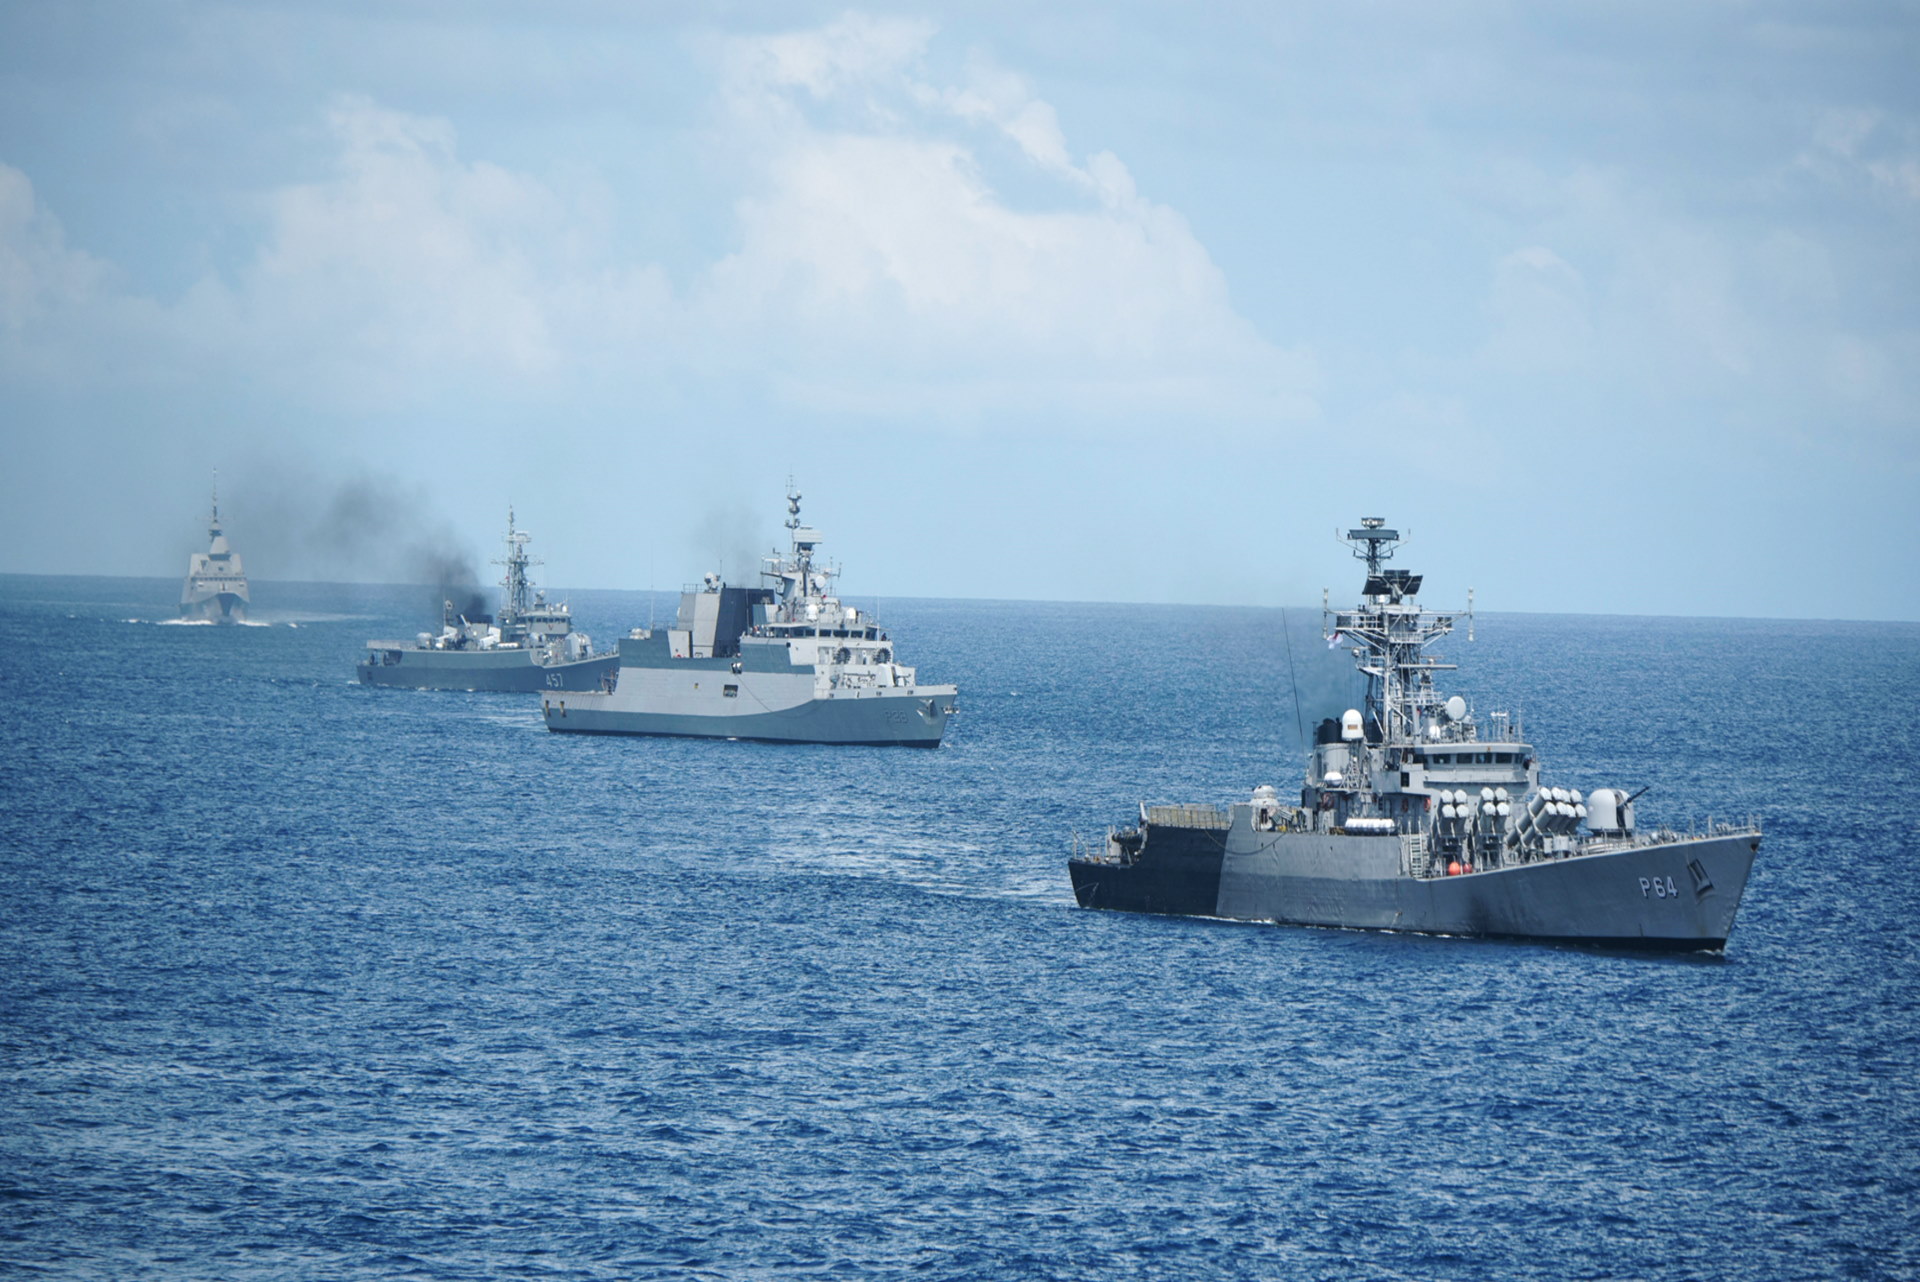 The Republic of Singapore Navy, Indian Navy and Royal Thai Navy conducting manoeuvring drills during SITMEX 2020